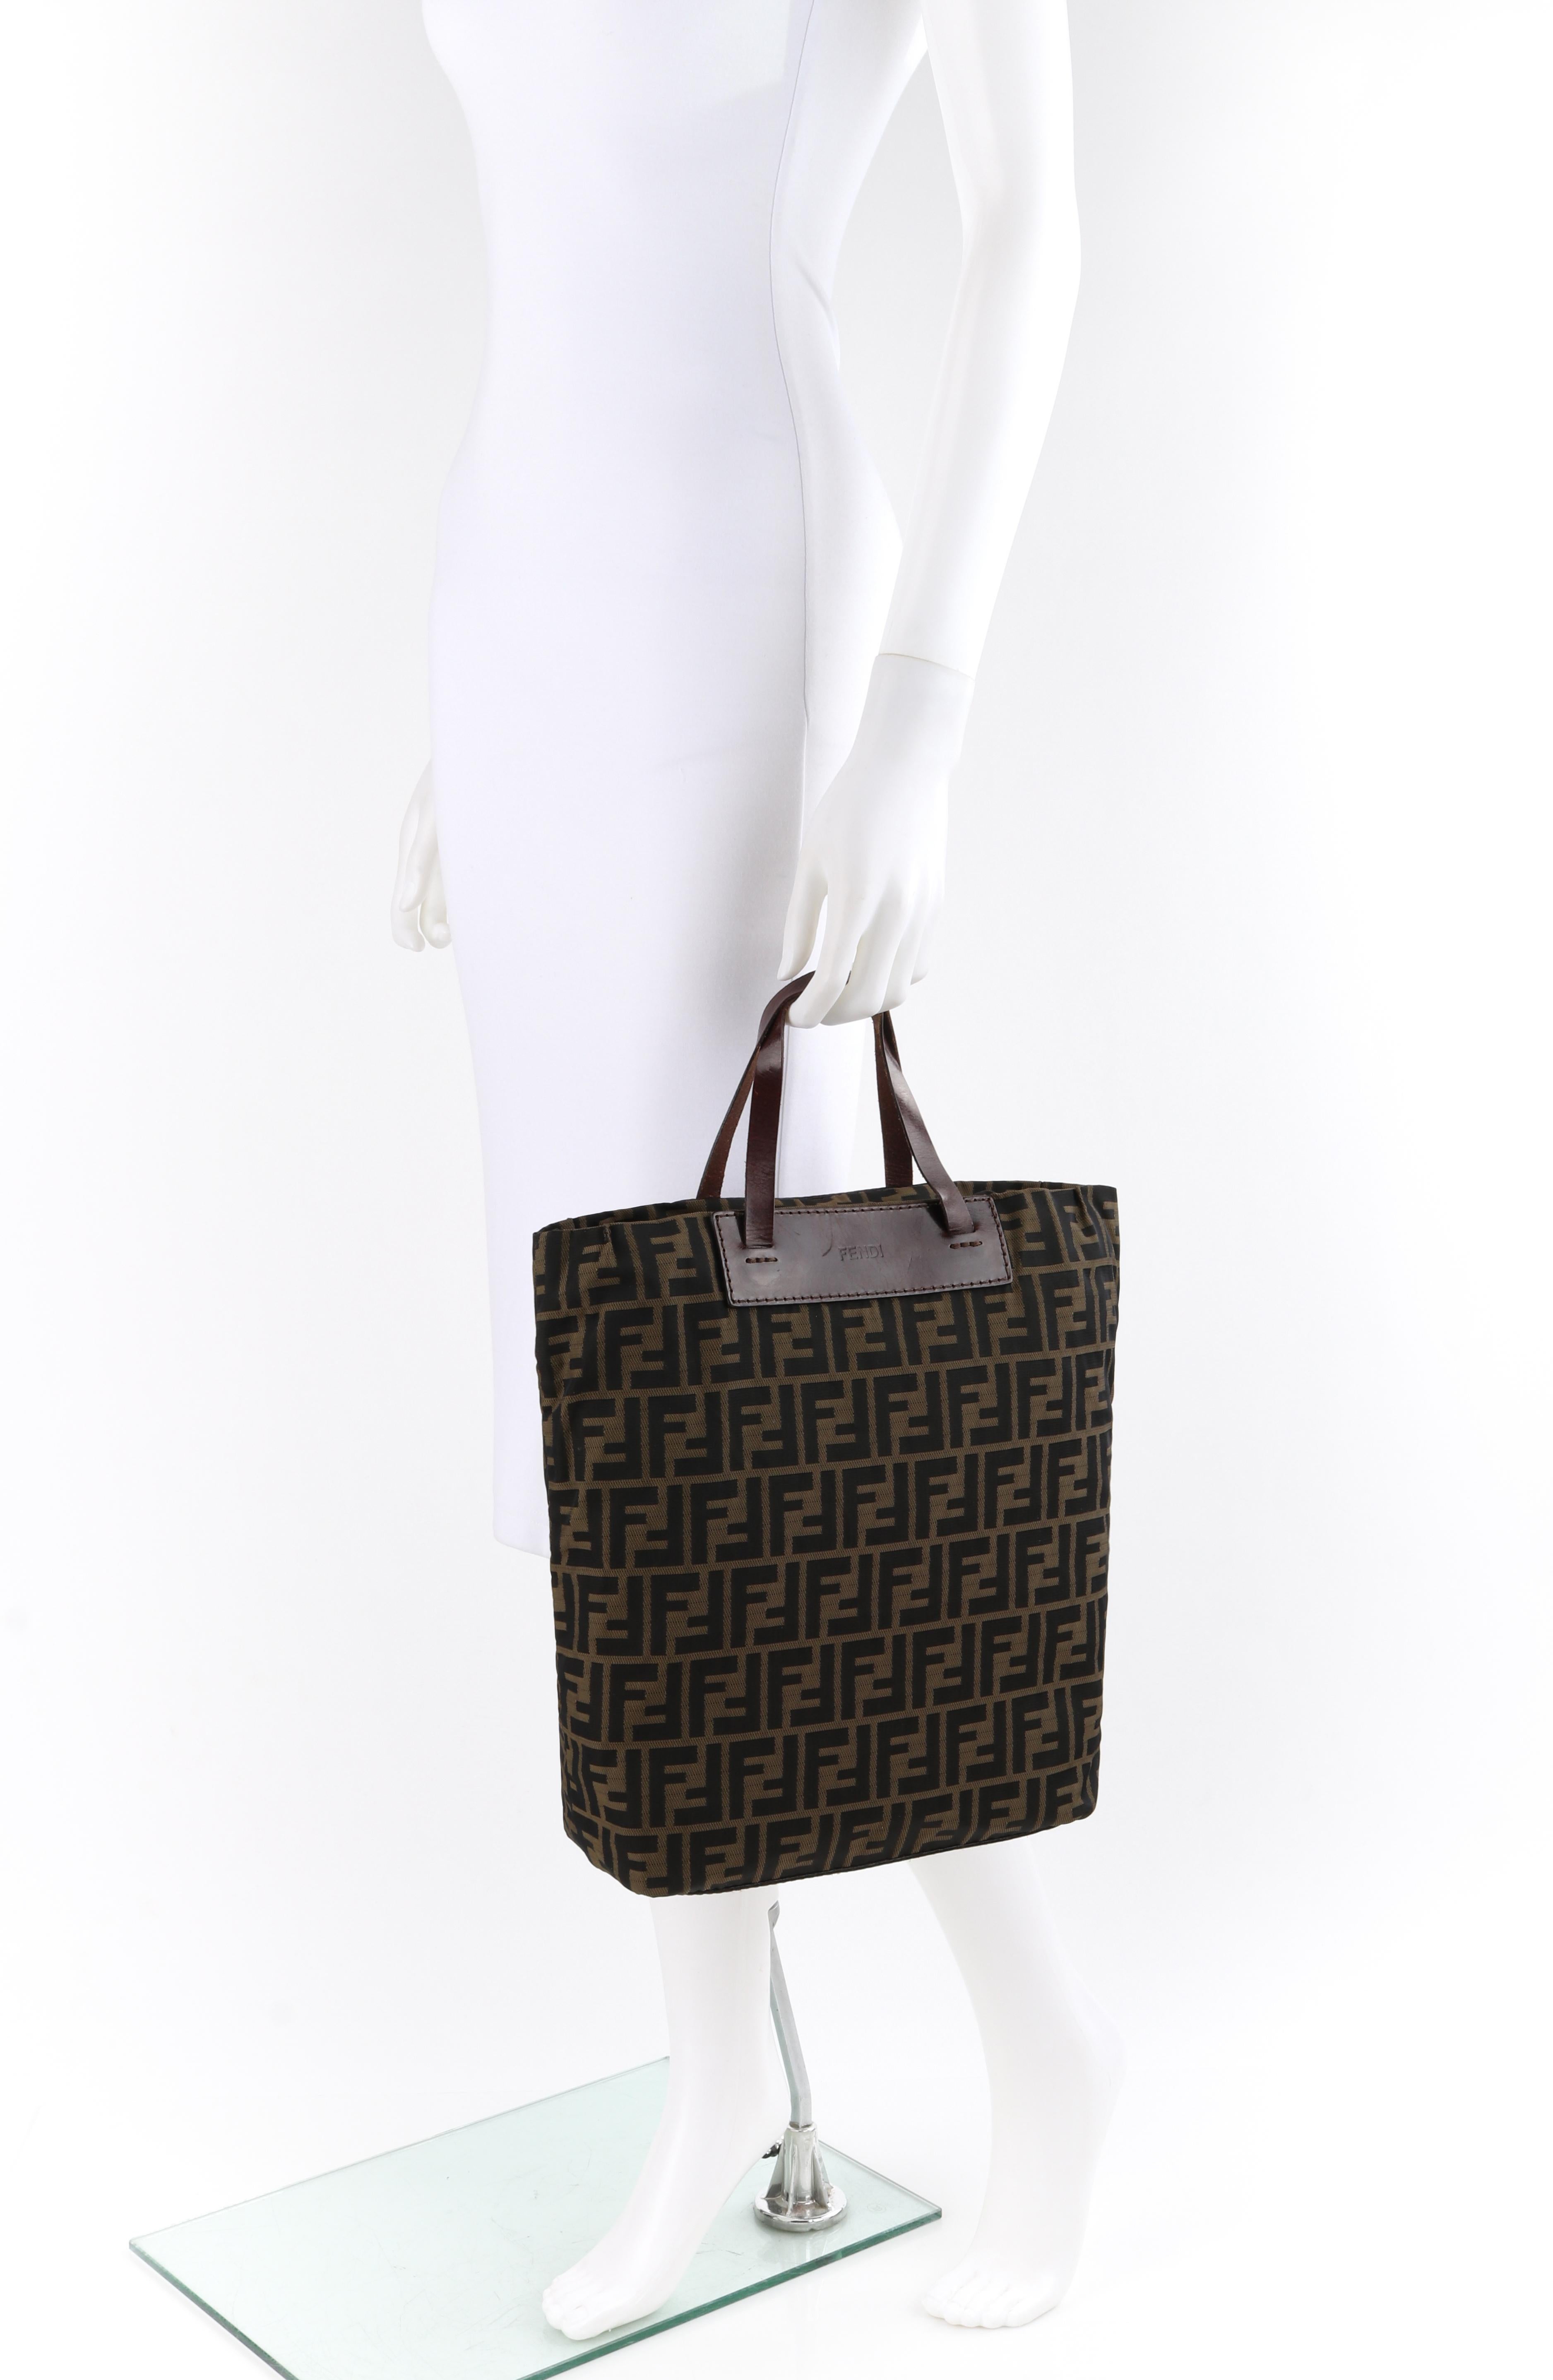 FENDI Brown Zucca Monogram Canvas Dual Handle Foldable Shopping Tote
  
Brand / Manufacturer: Fendi
Designer: Karl Lagerfeld
Style: Tote
Color(s): Shades of brown, black (exterior, interior); gold (hardware)
Lined: No
Unmarked Fabric Content: Canvas